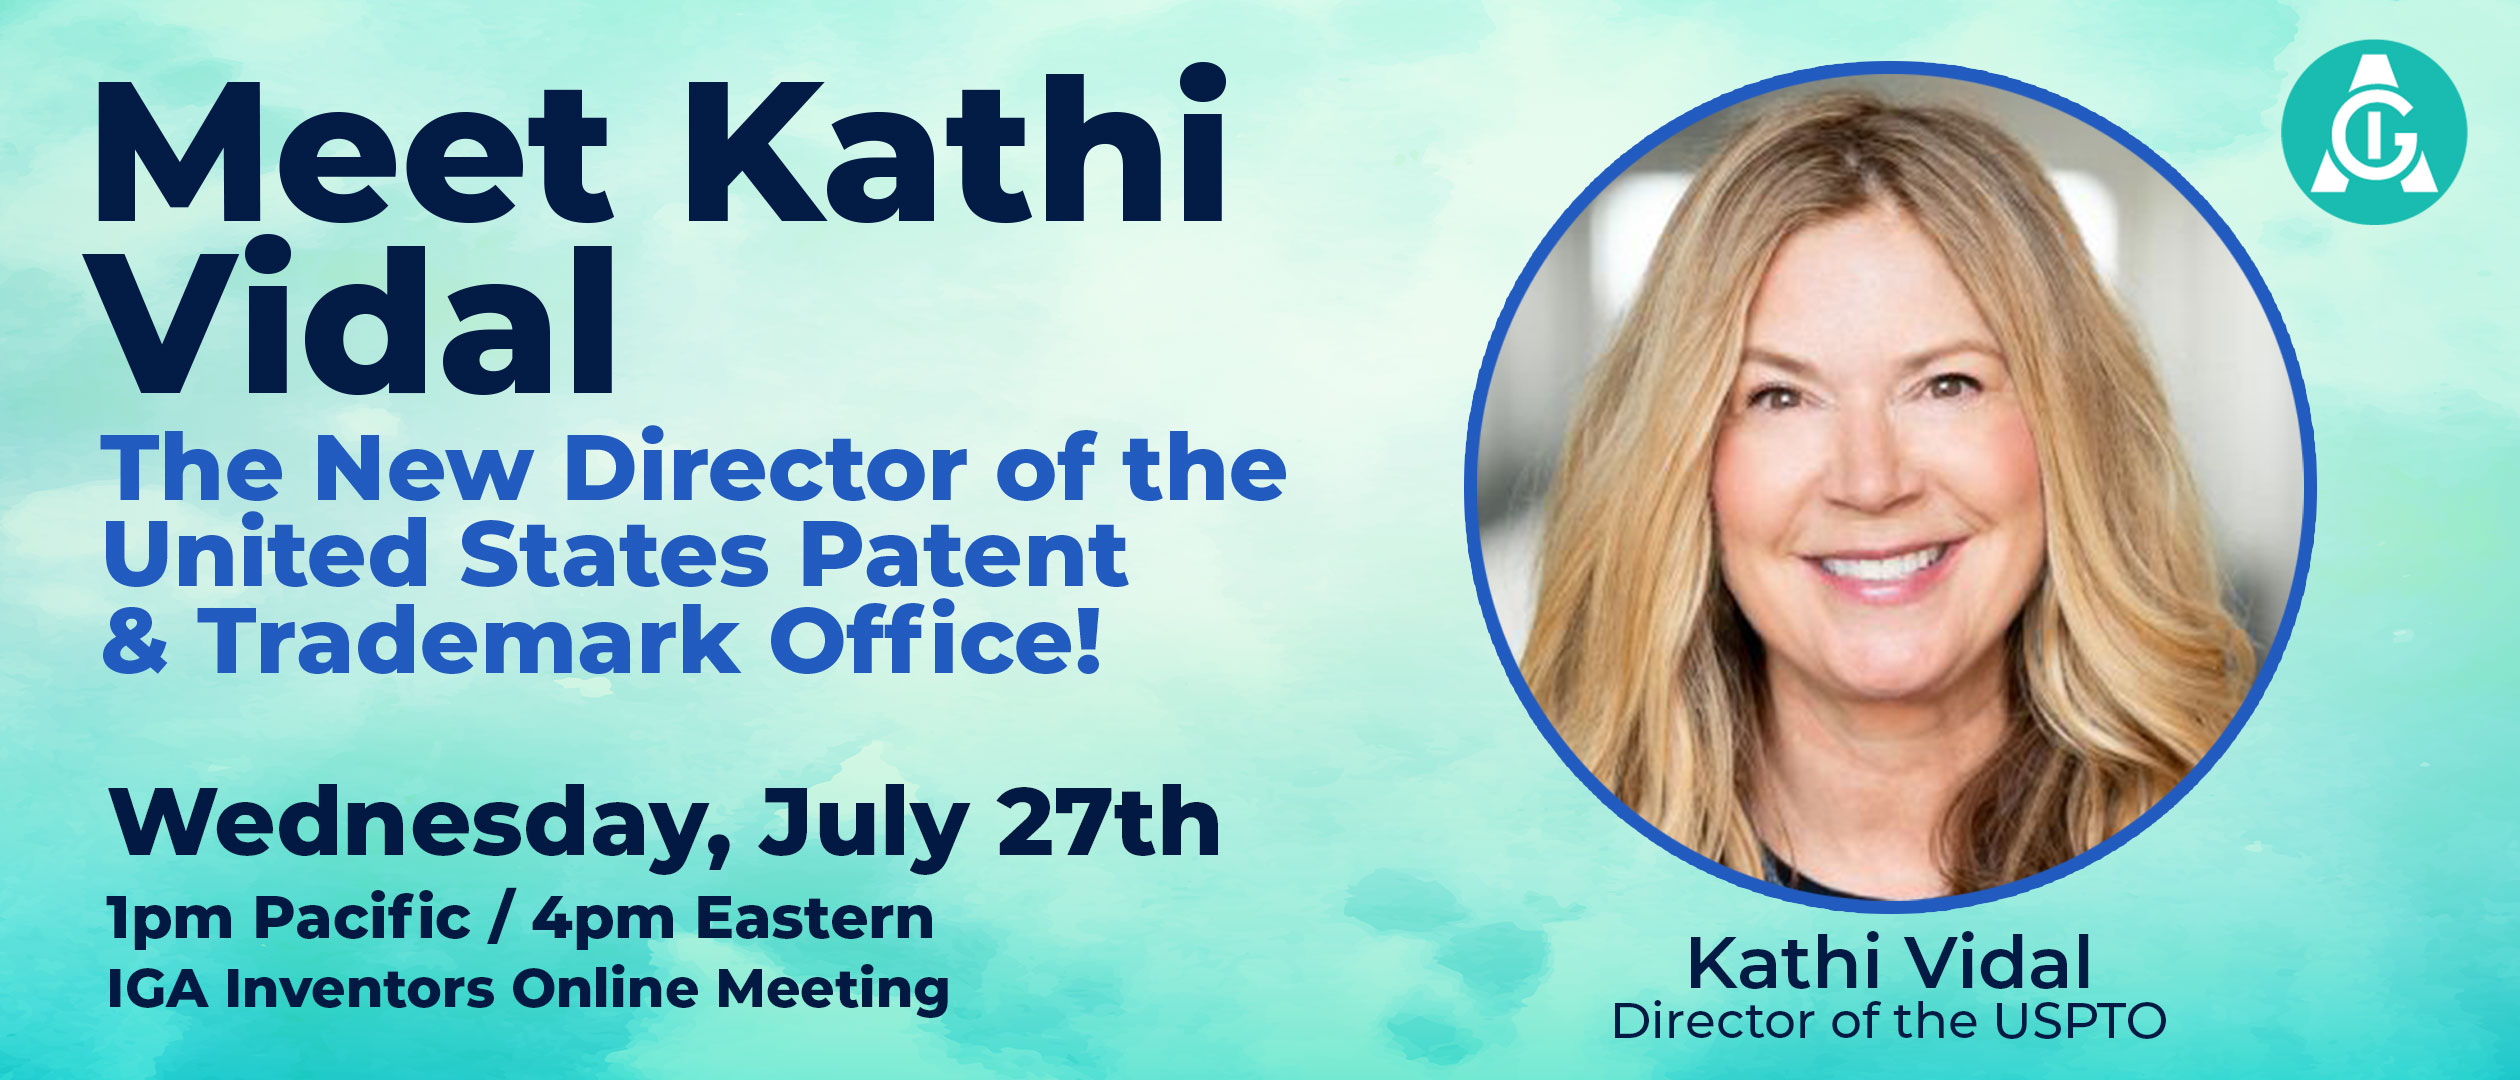 <h3><strong>Meet Kathi Vidal – The New Director of the USPTO</strong></h3>